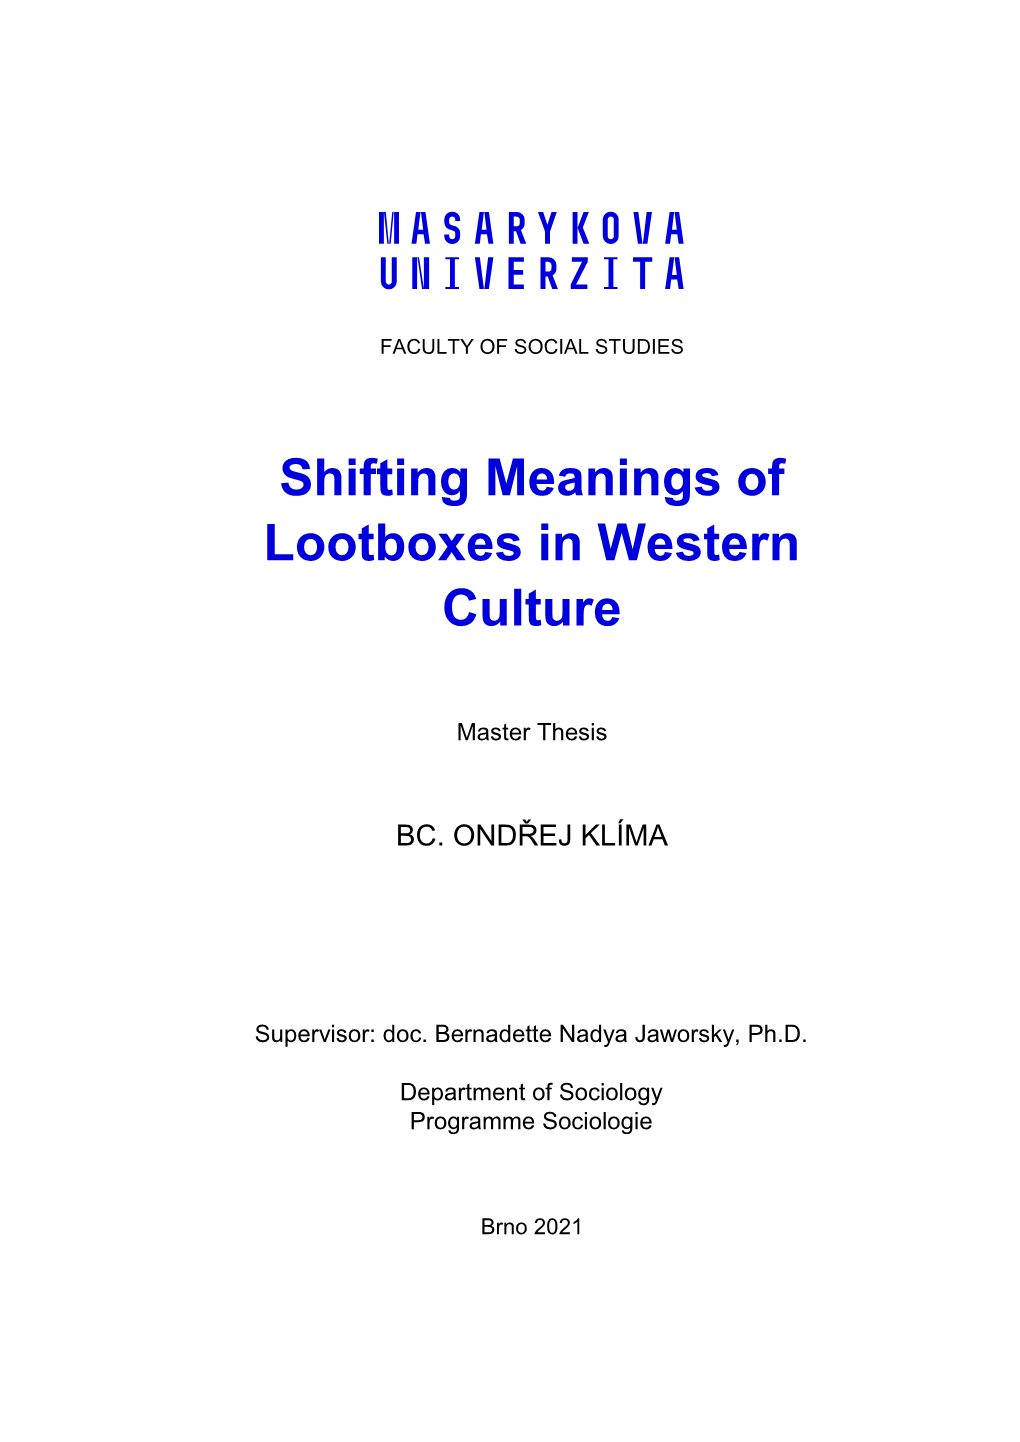 Shifting Meanings of Lootboxes in Western Culture